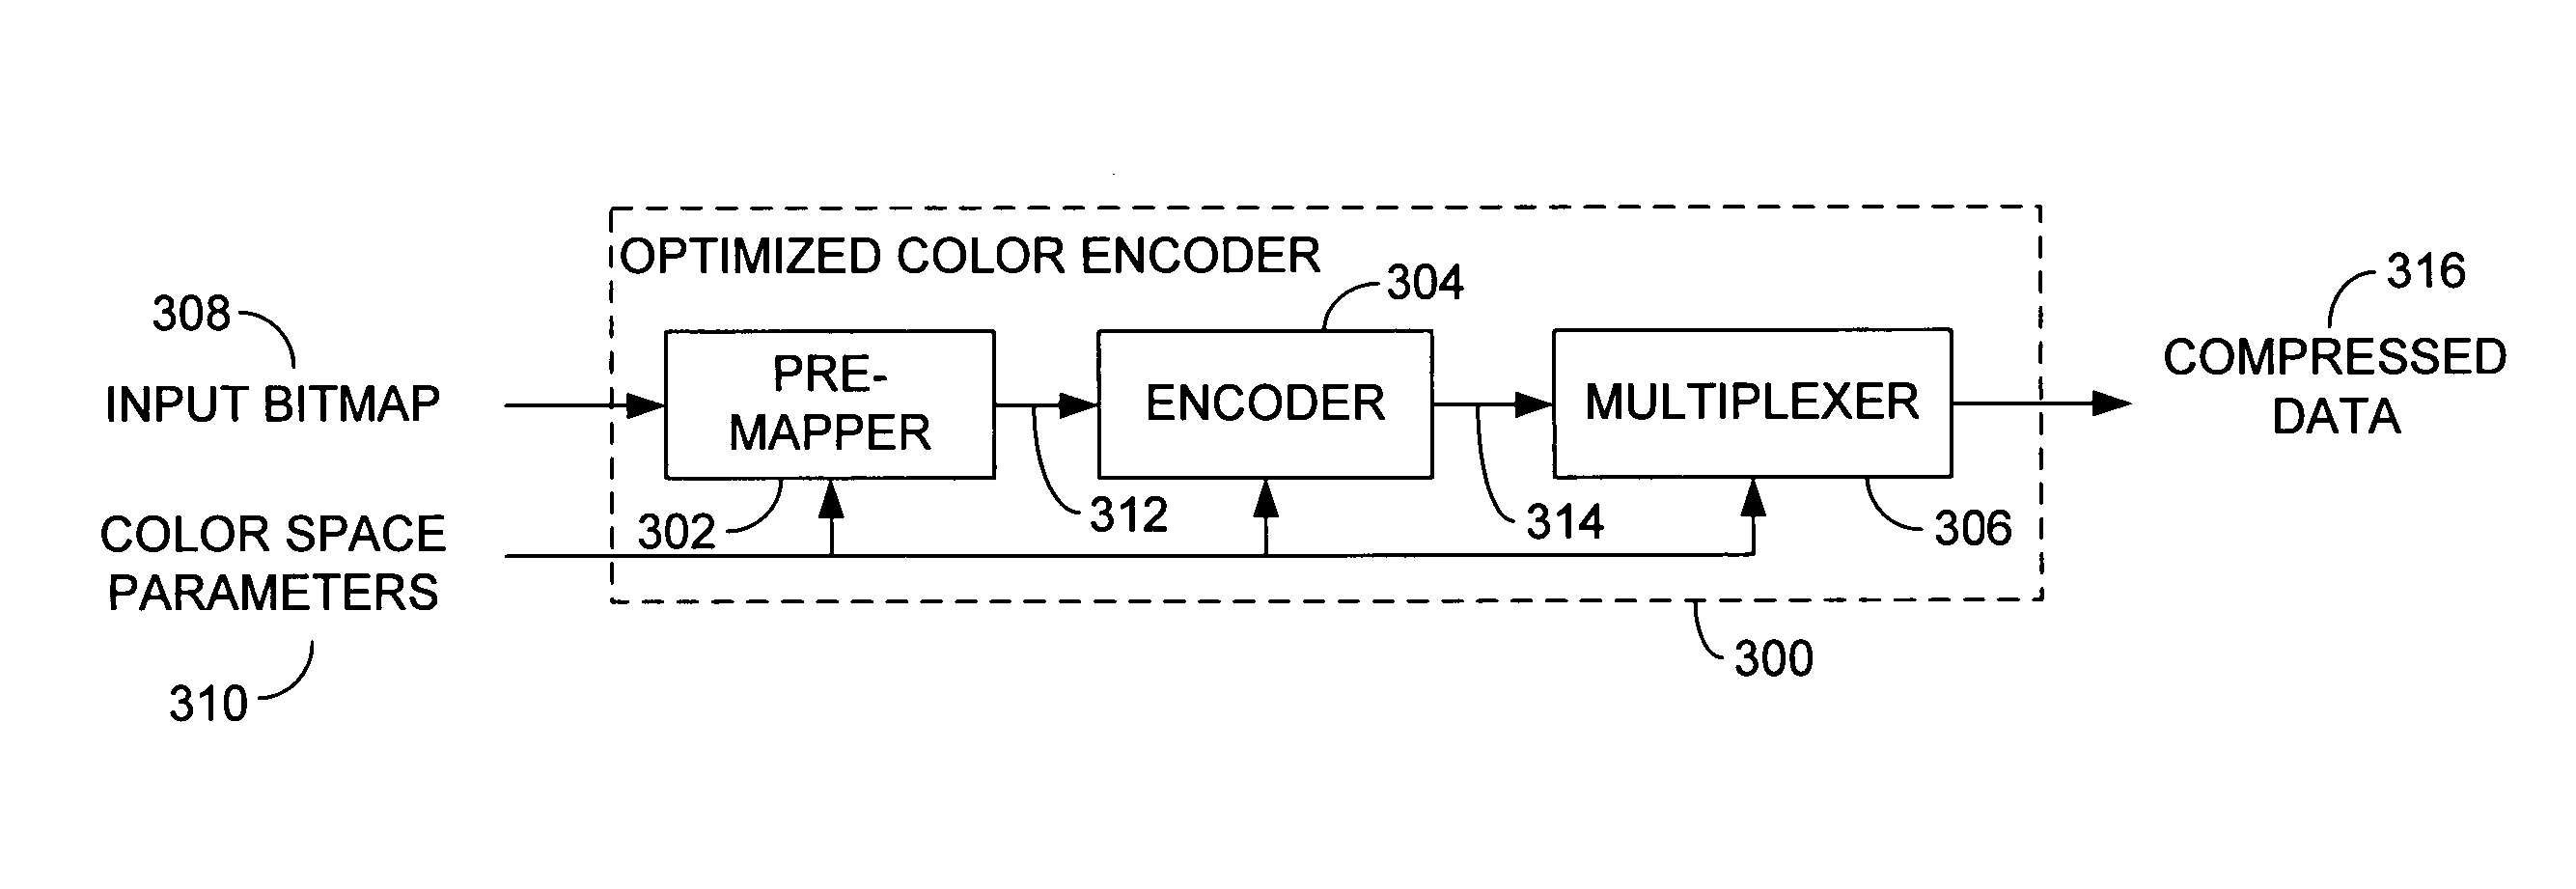 Optimized color image encoding and decoding using color space parameter data